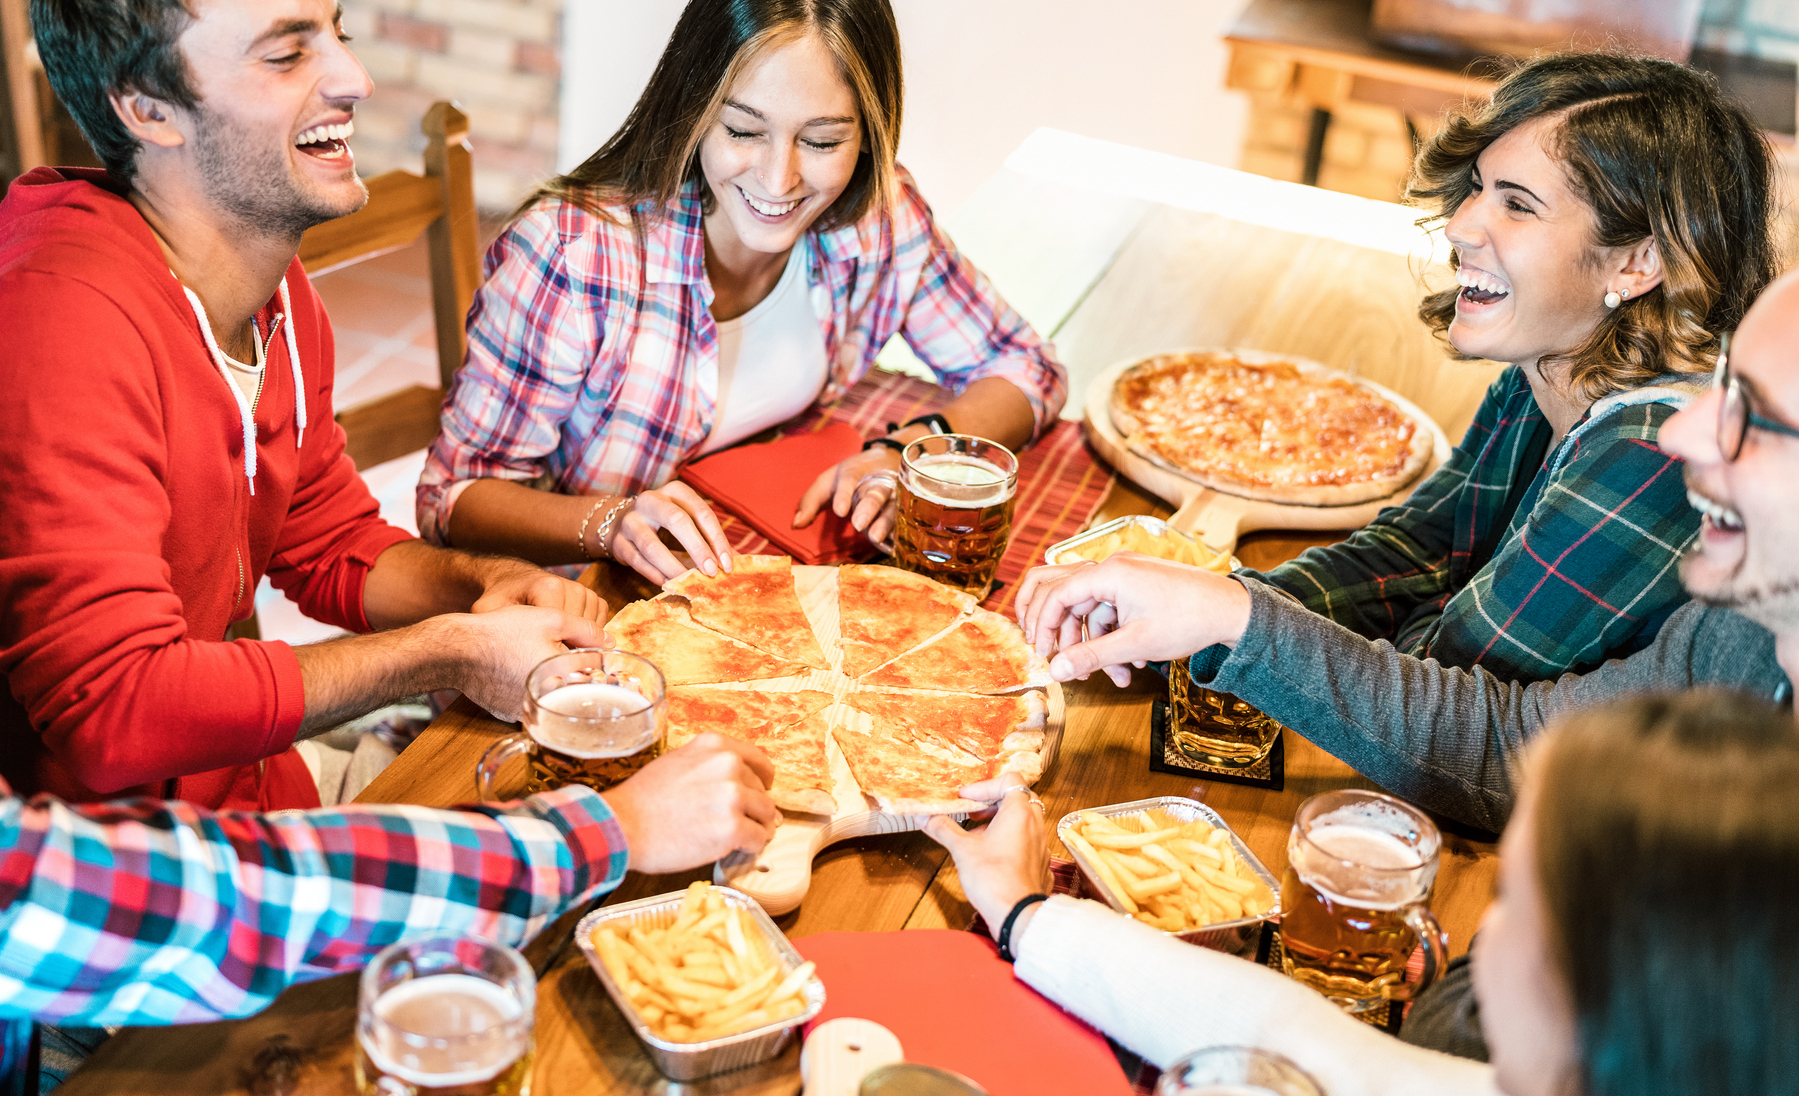 Young friends on genuine laugh while eating pizza at home on family reunion - Friendship concept with happy people enjoying time together having fun at pizzeria drinking brew pints - Warm vivid filter